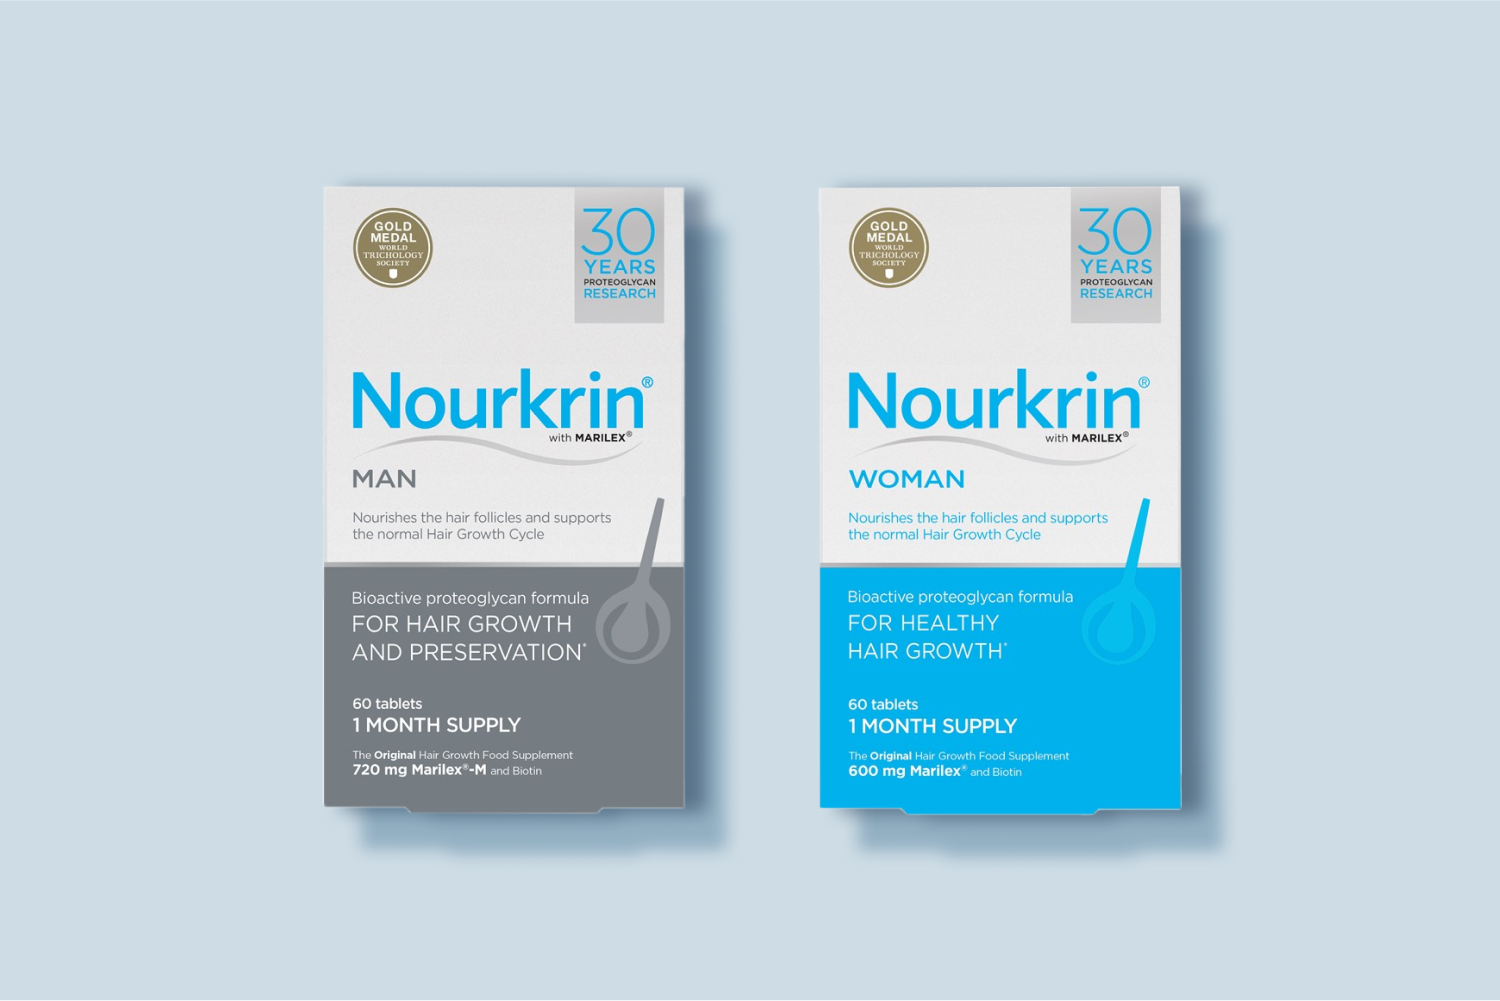 How to Use Nourkrin to Boost Hair Growth